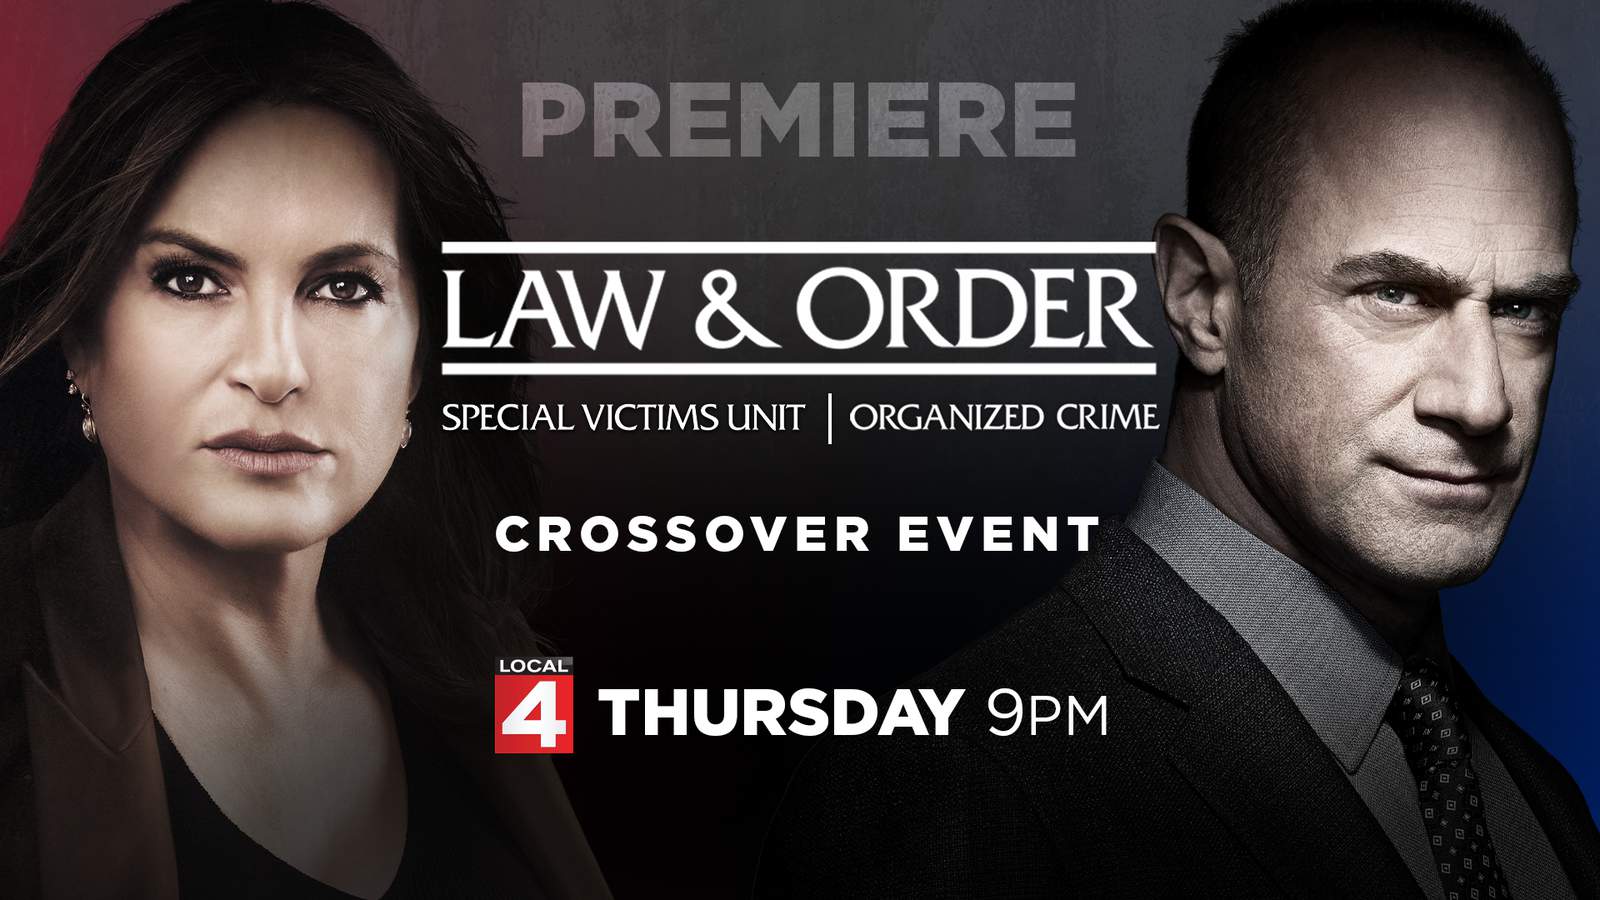 ‘Law & Order’ crossover event and series premiere